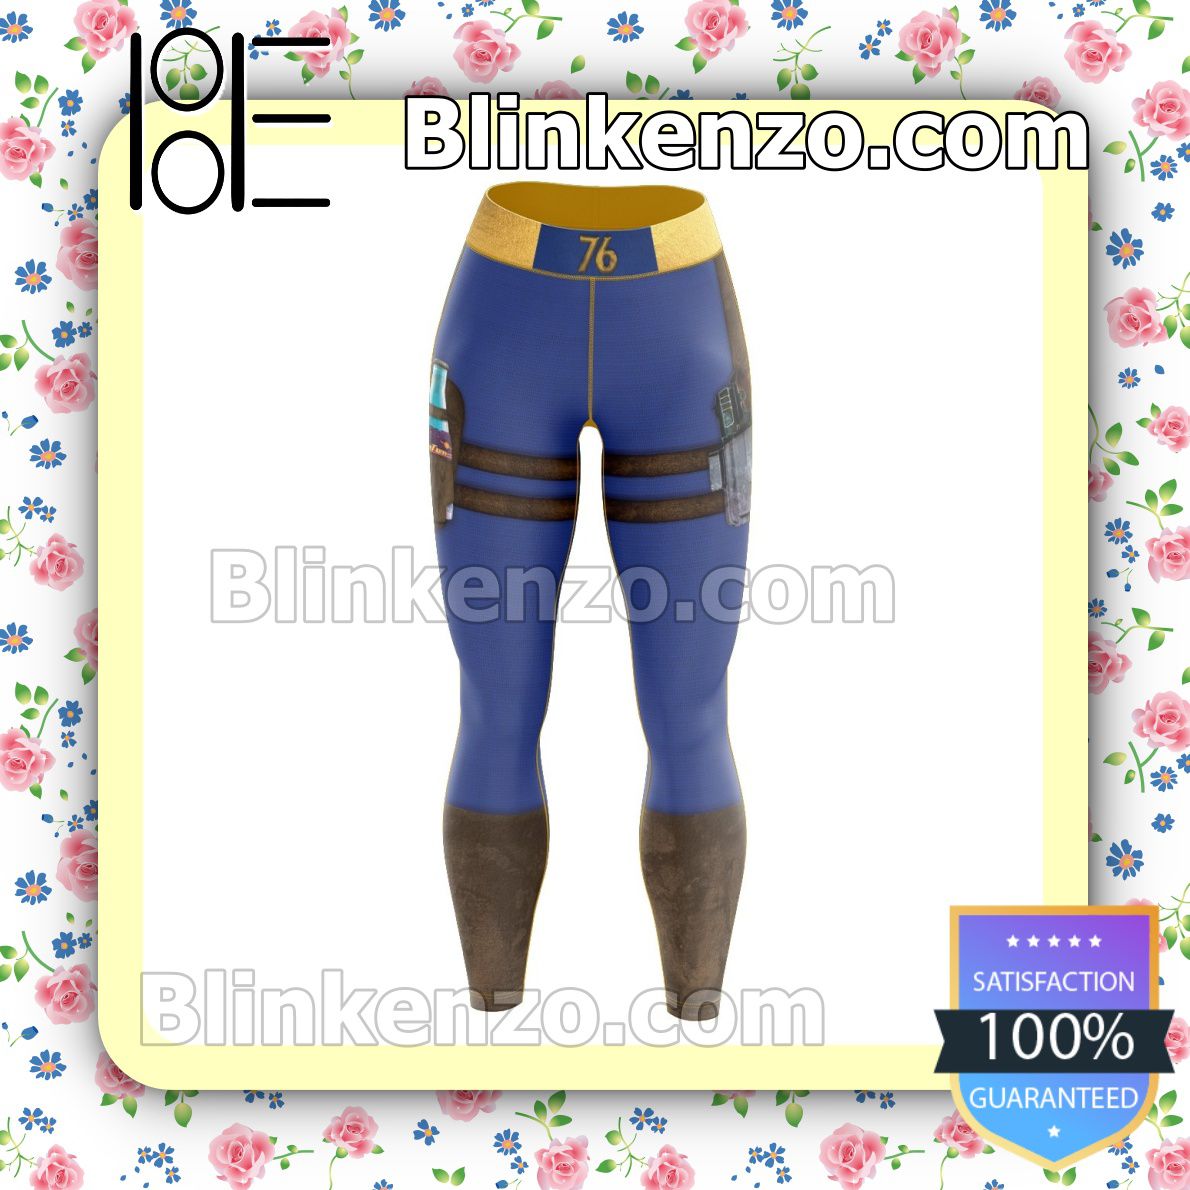 Top Rated Bunker 76 Workout Leggings